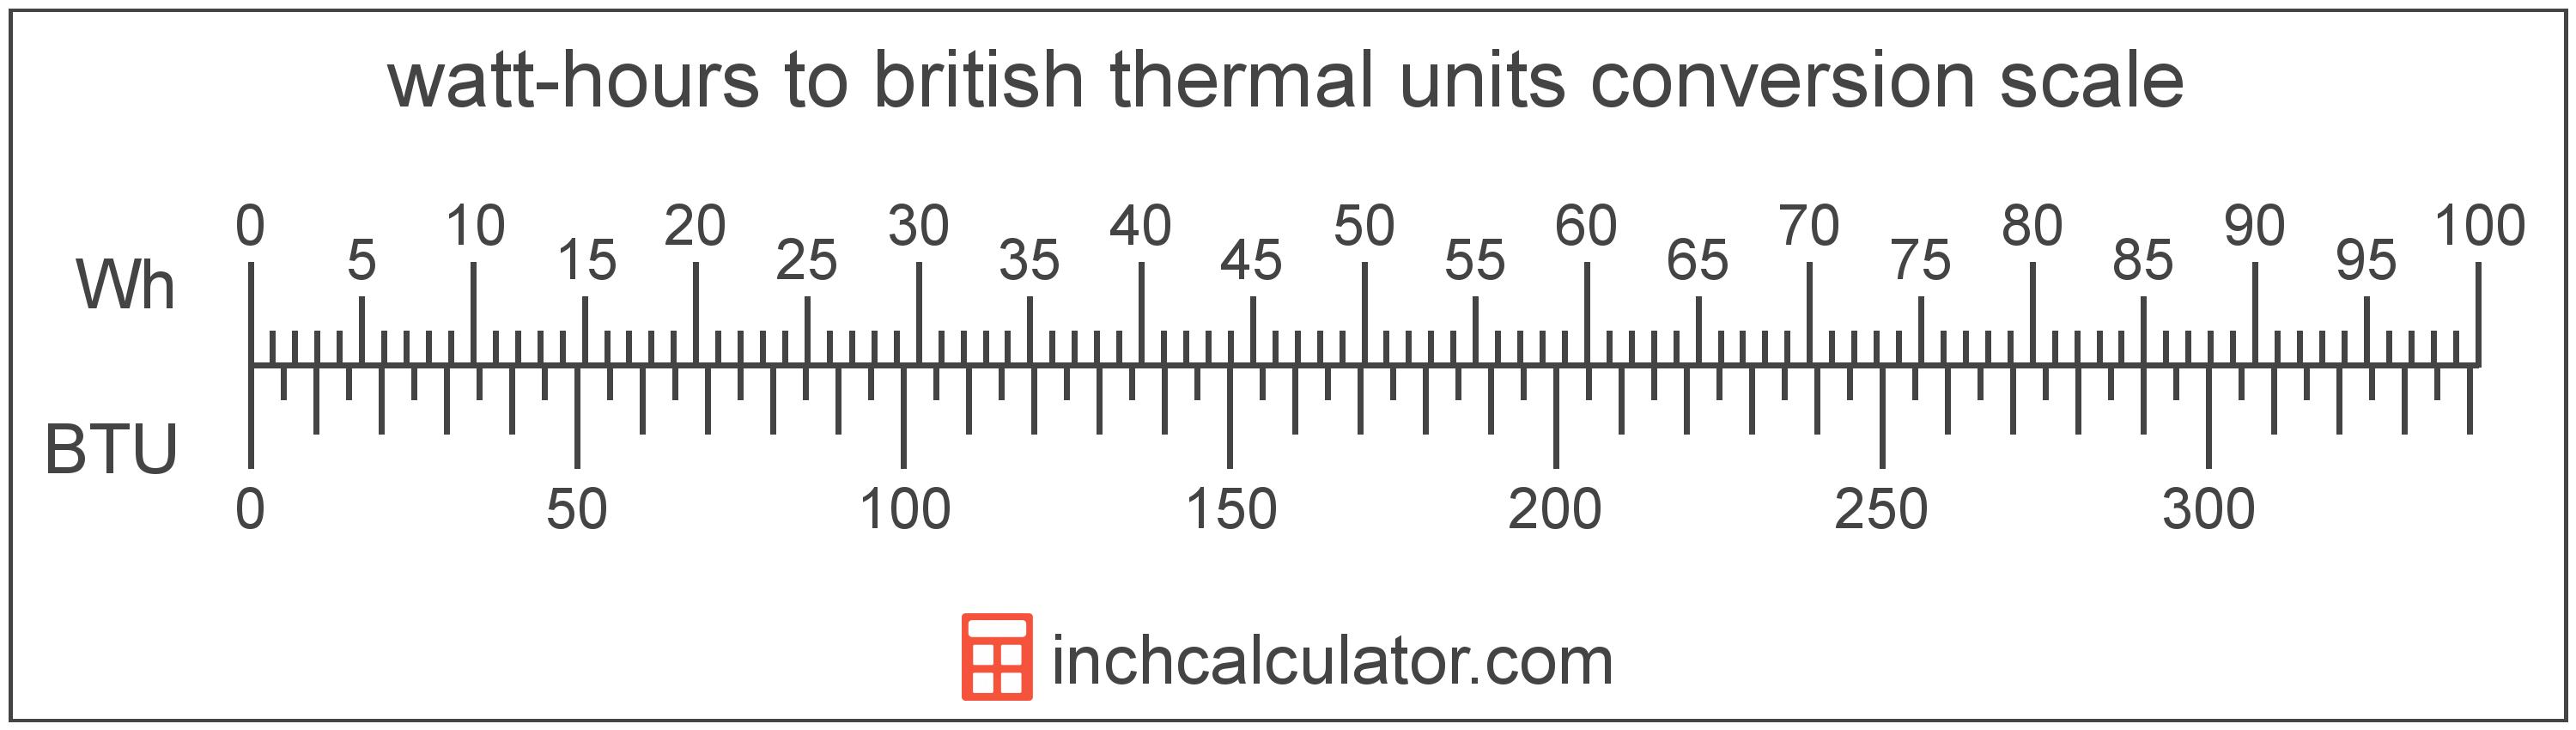 conversion scale showing watt-hours and equivalent british thermal units energy values